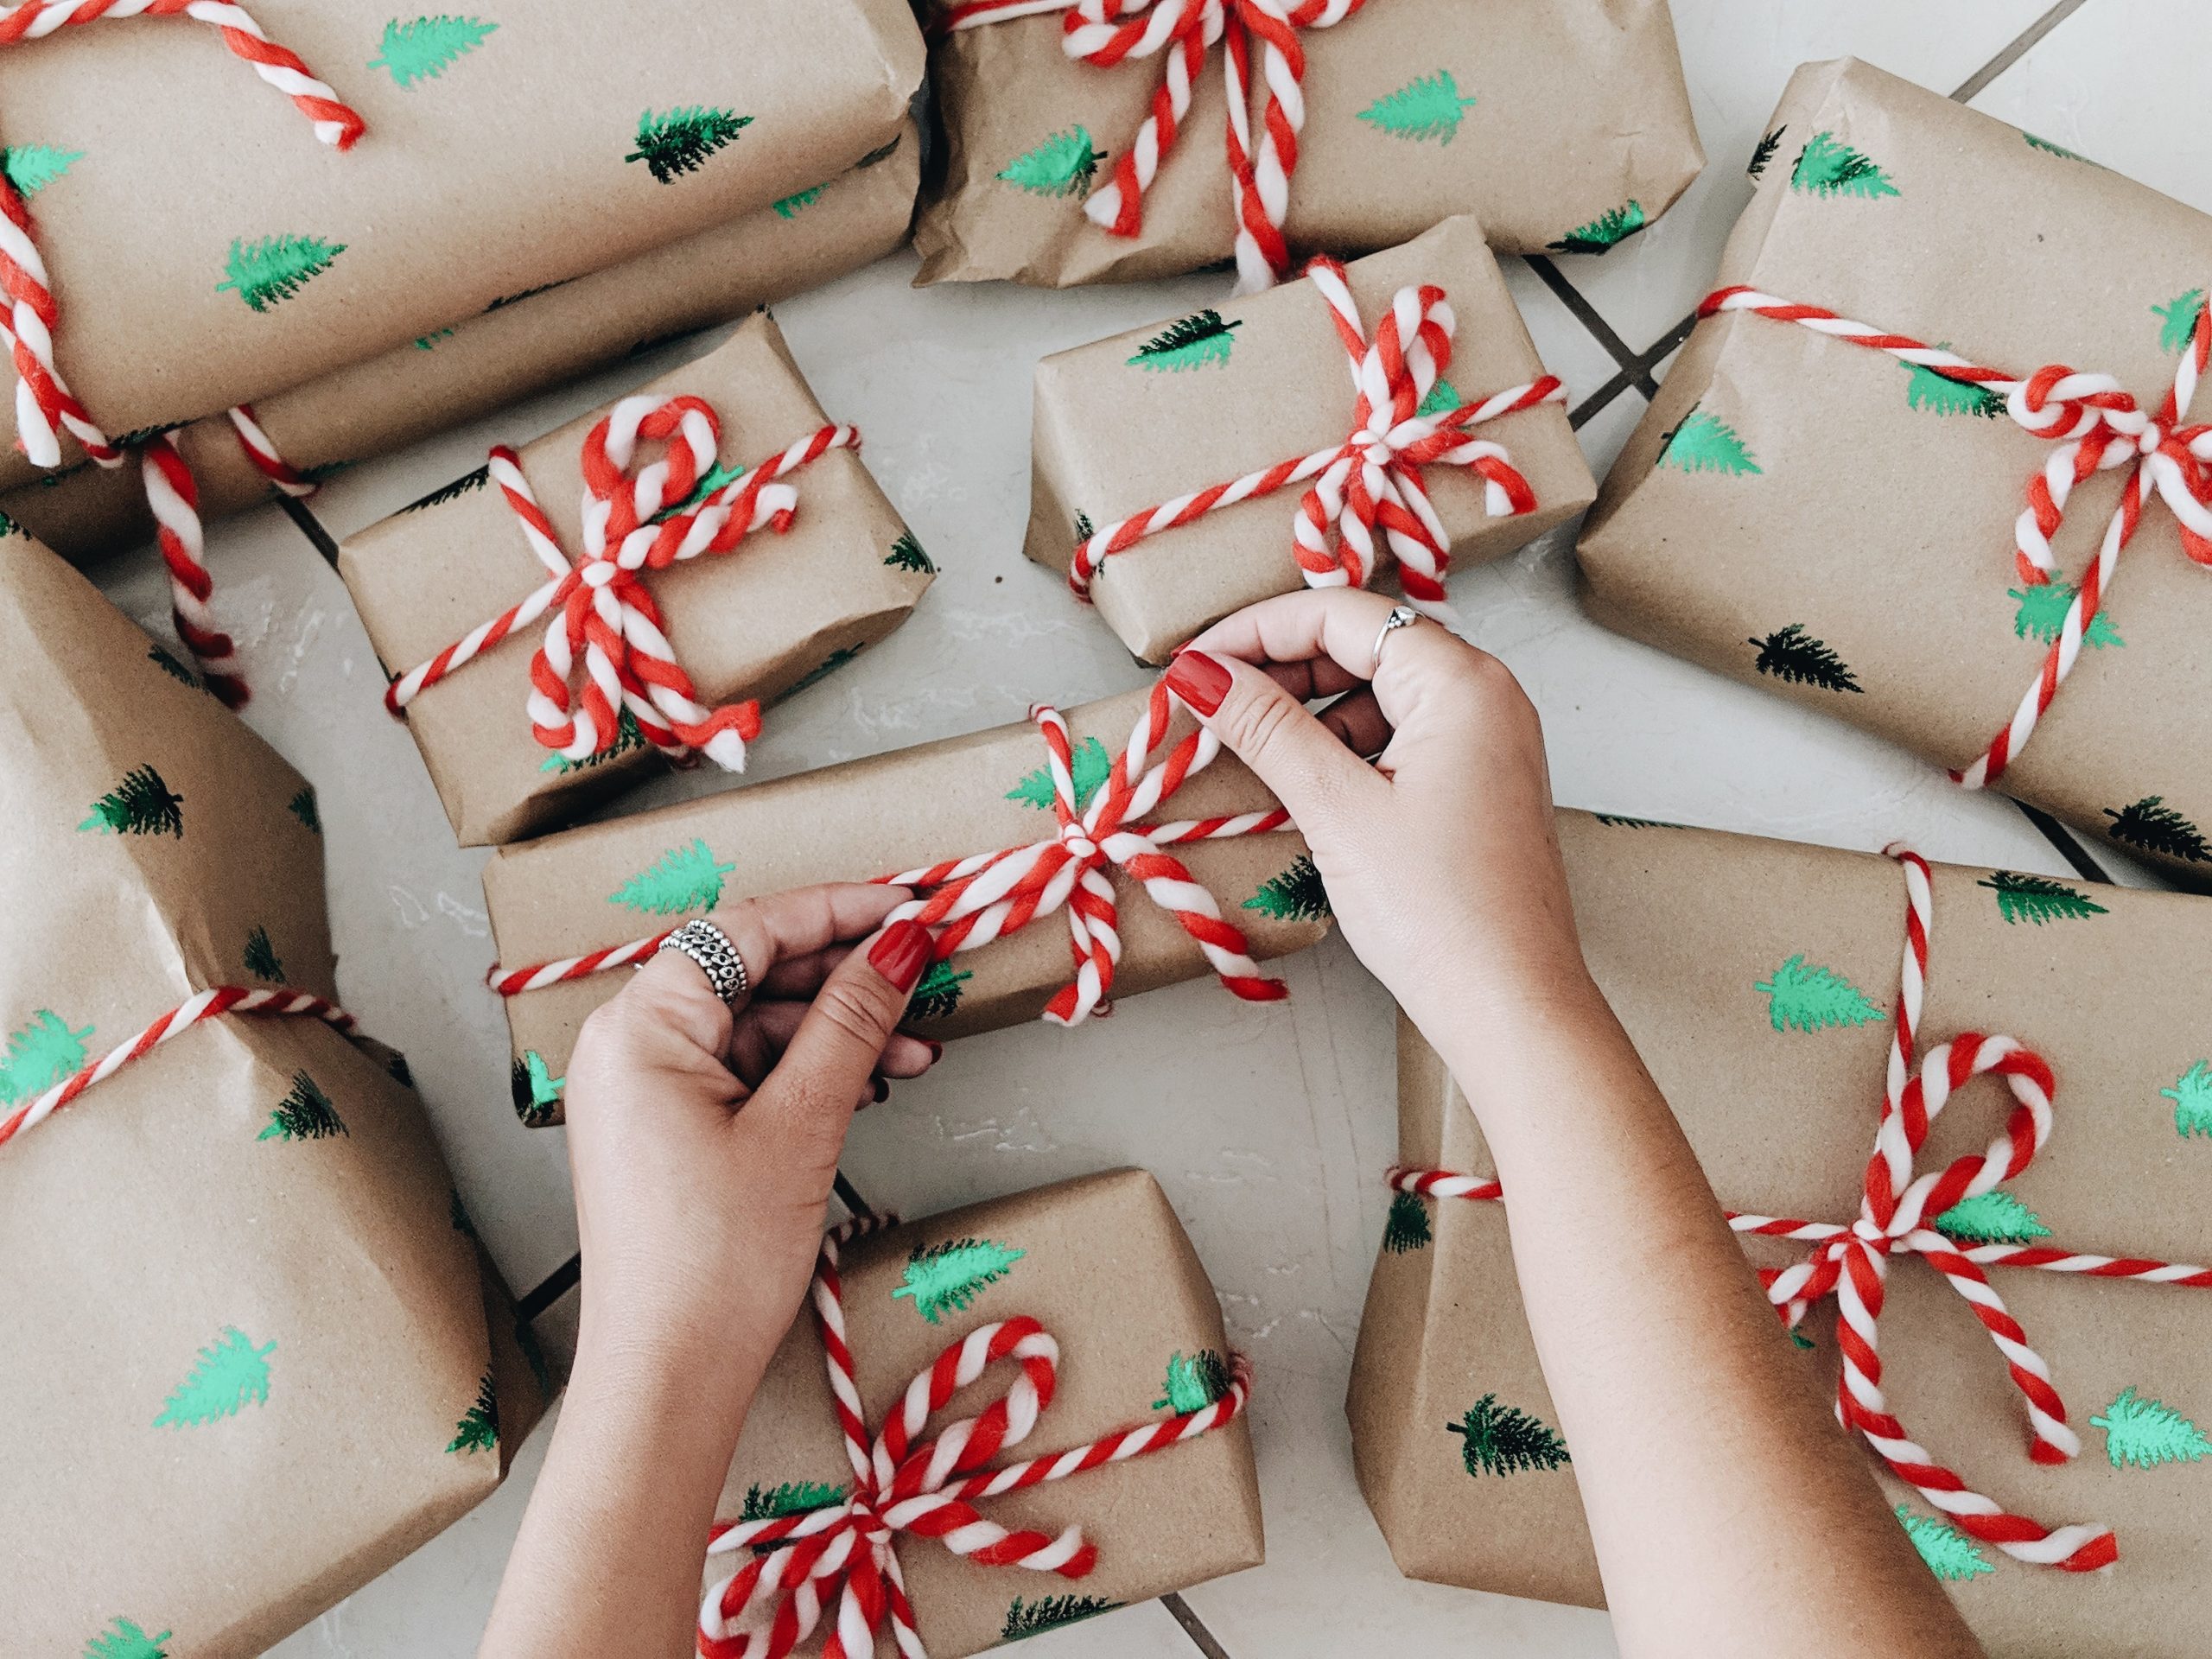 Wrapping Christmas gifts using sustainable materials CREDIT Unsplash